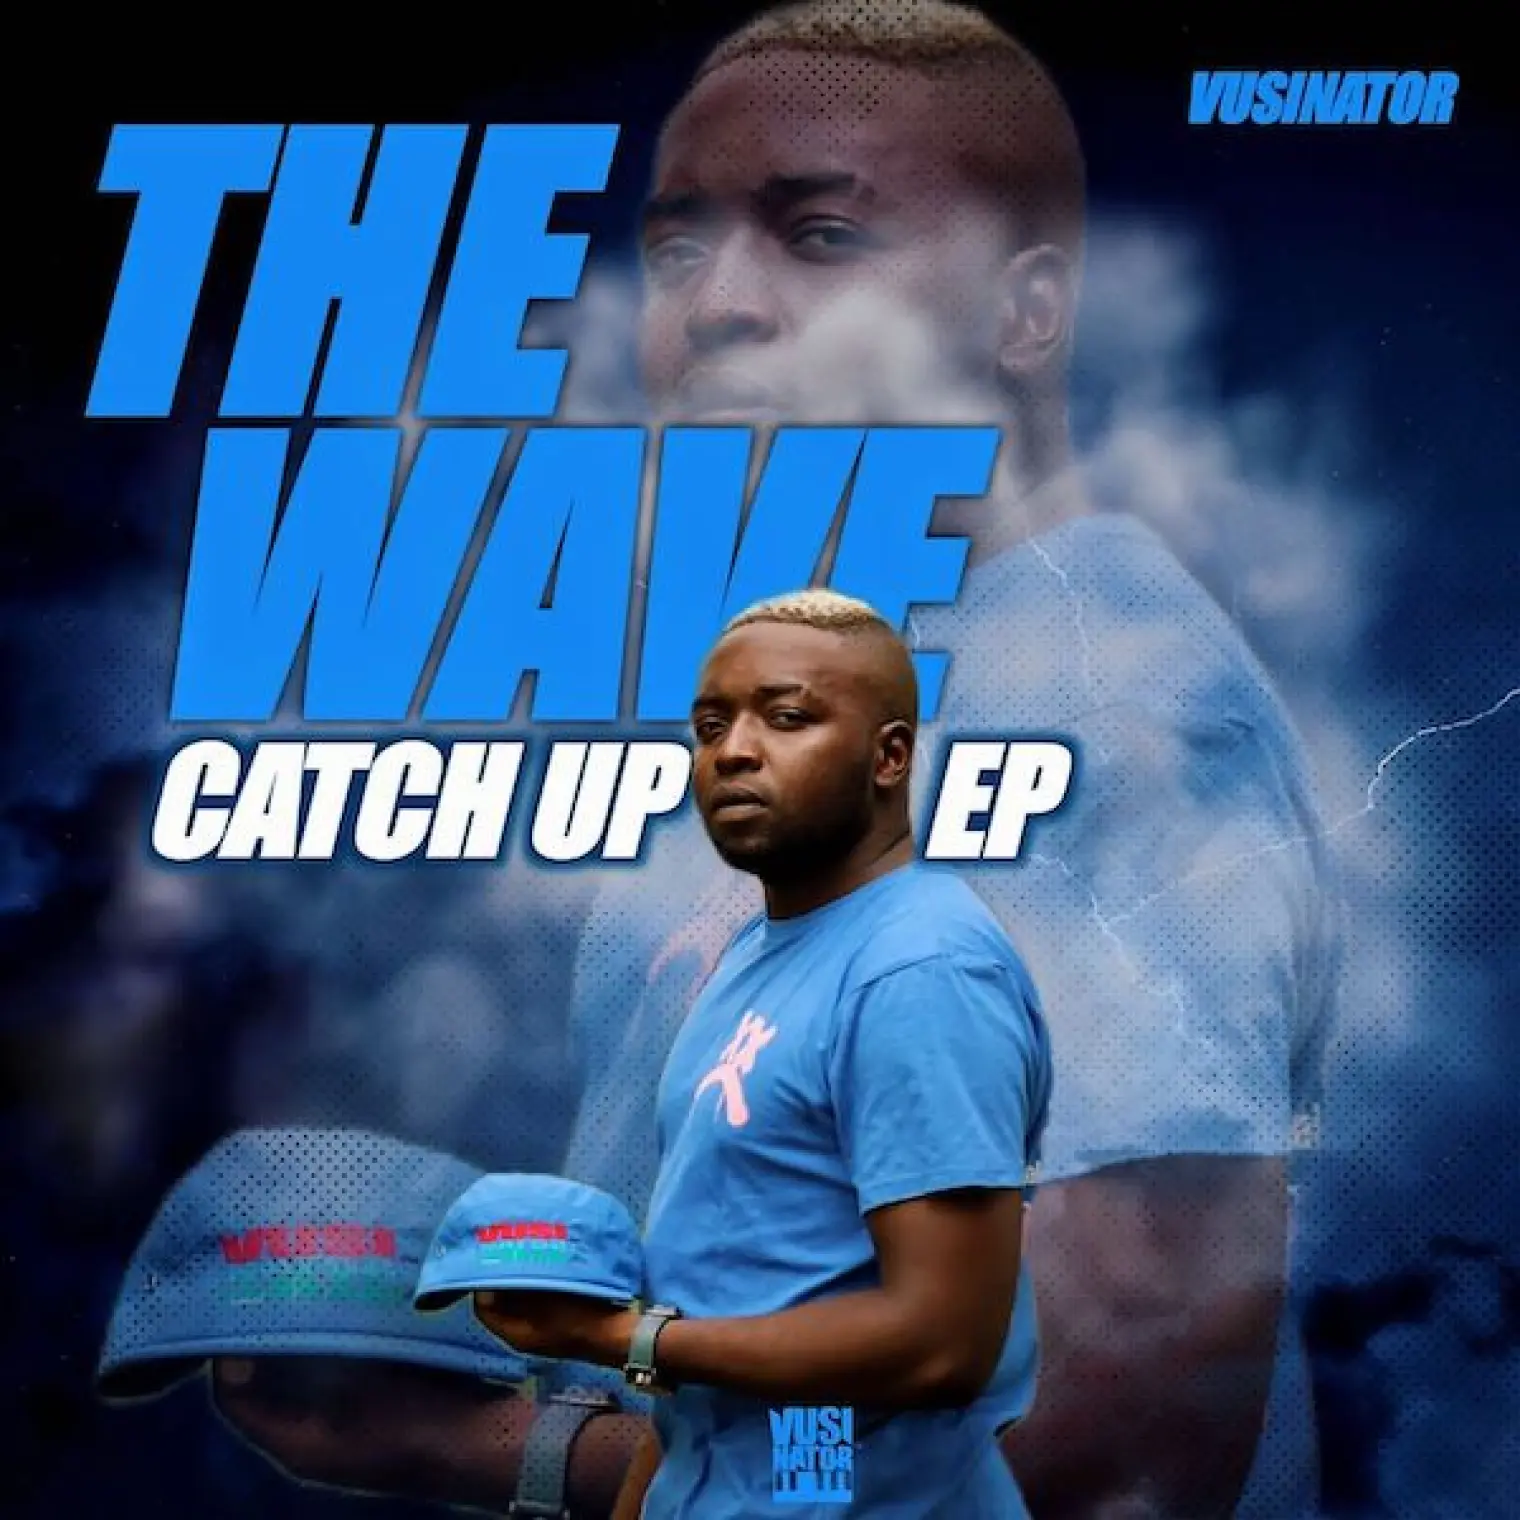 The Wave Catch Up EP -  Vusinator 